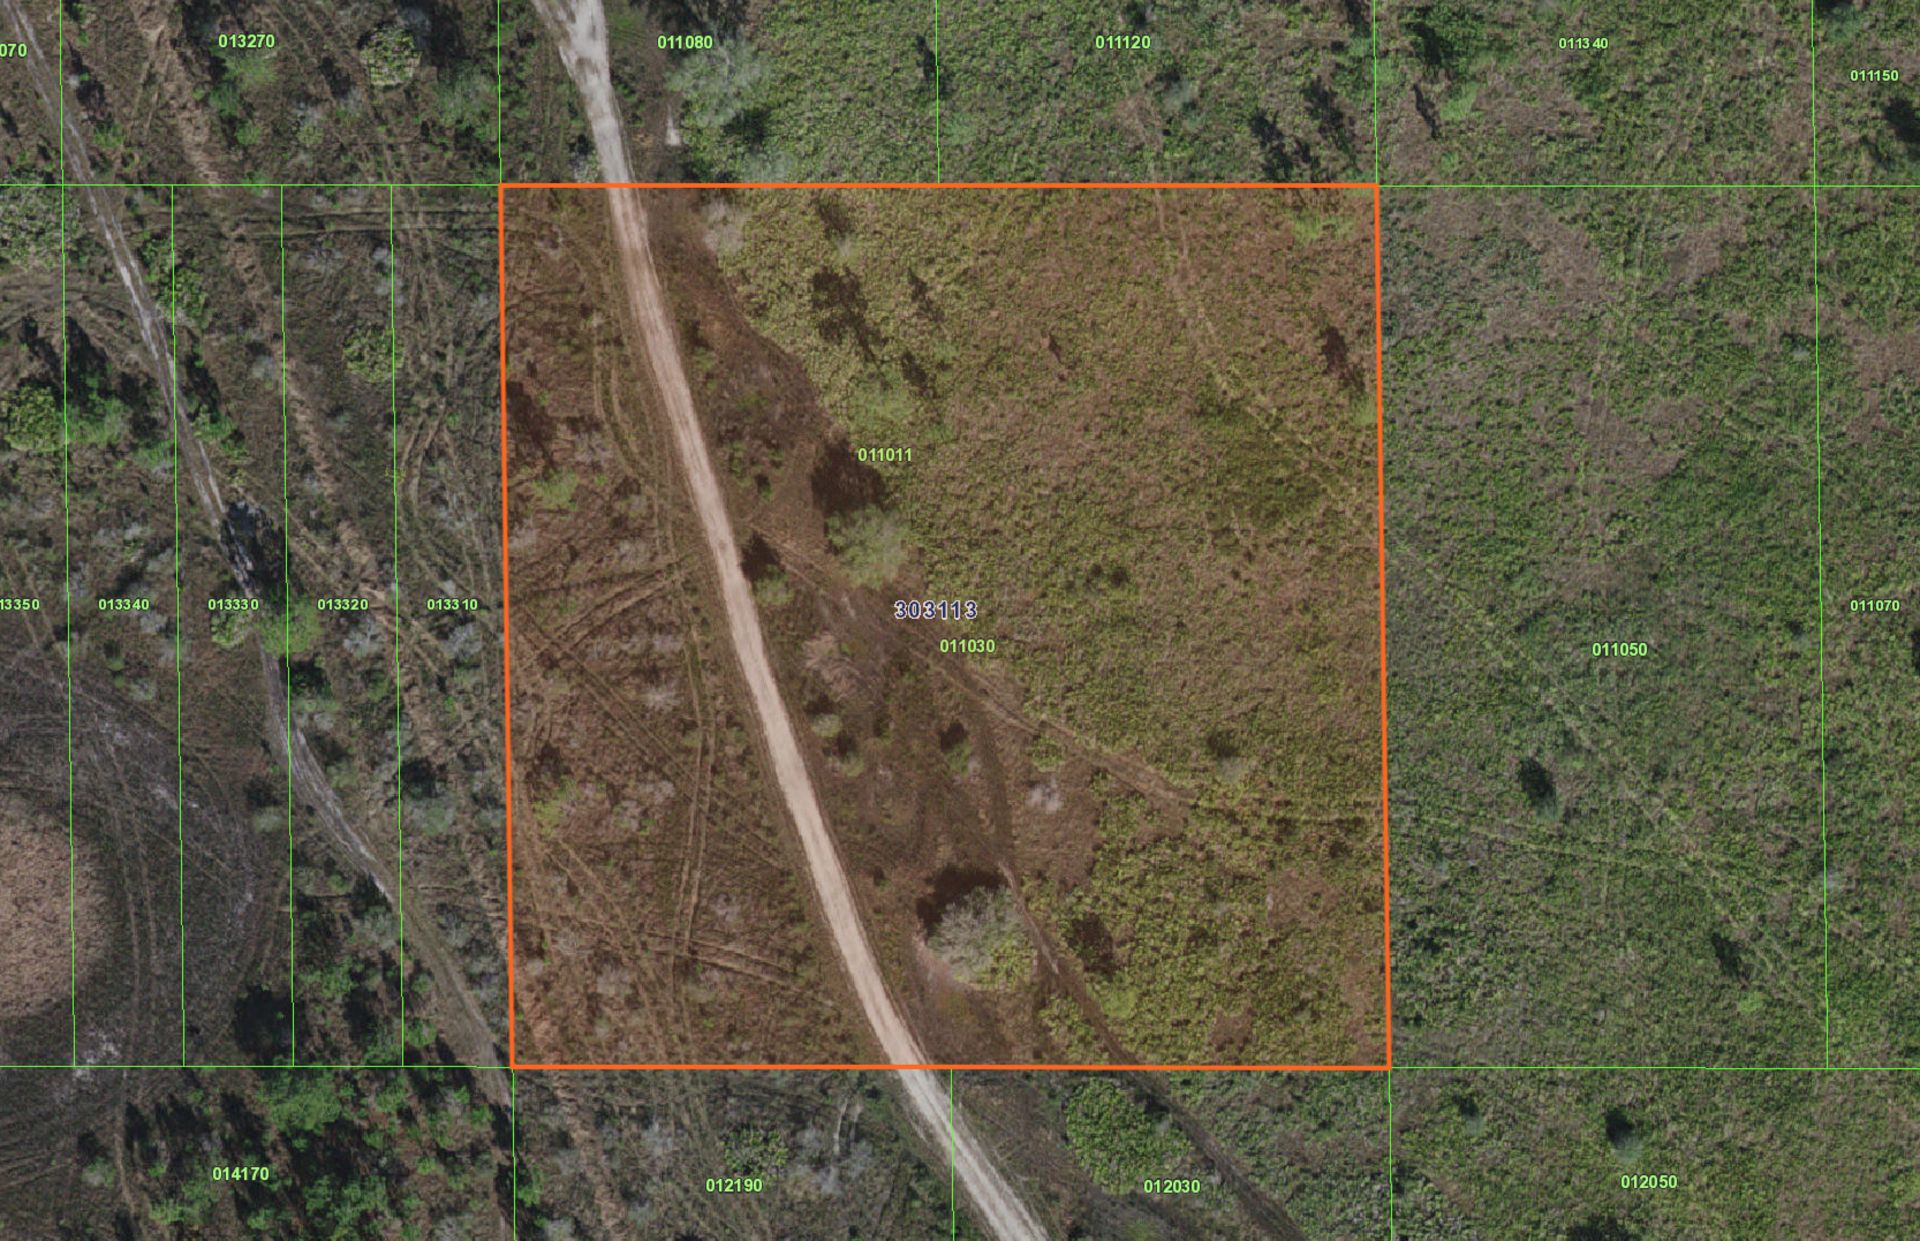 Expansive 2.52 Acres in Southeastern Polk County: Florida's Investment Jewel! - Image 7 of 12